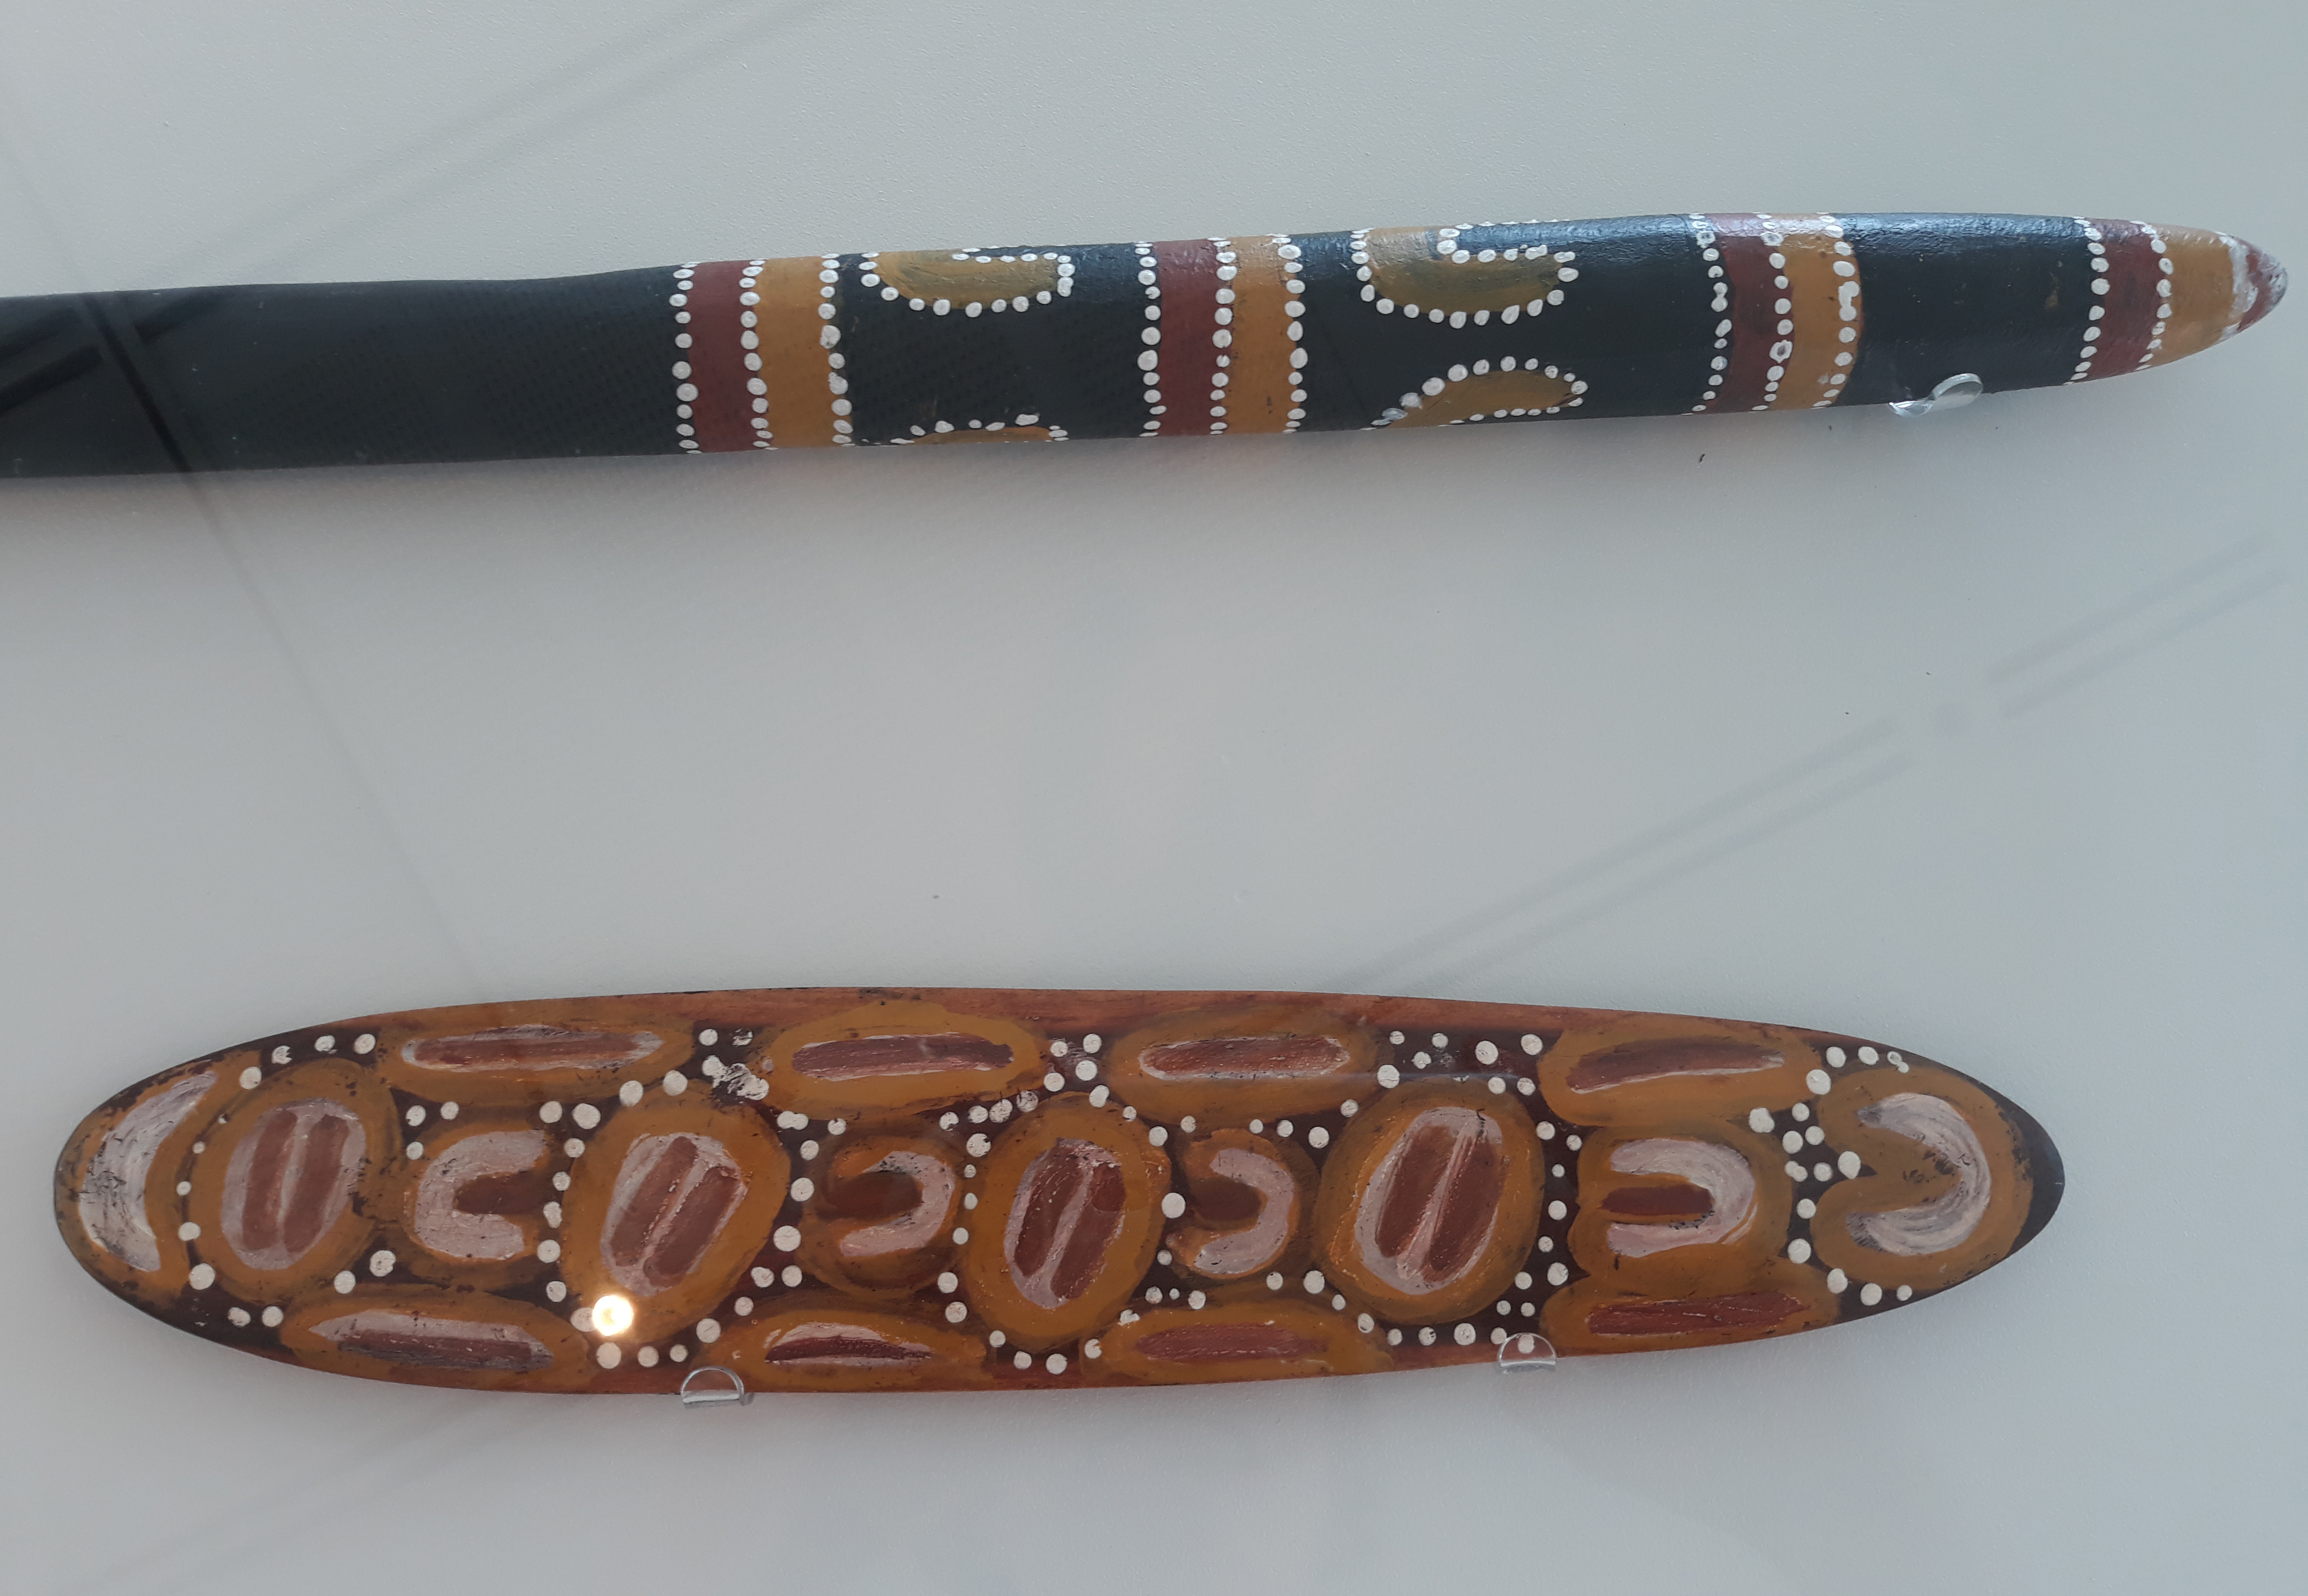 Ceremonial artefacts submitted by members of the Uluru-Kata Tjuta National Park Board of Management  to the committee during a hearing in Adelaide on 12 March 1999.  The artefacts bear a message to the Senate that the Anangu people of Uluru wish to continue a relationship with the Parliament. The traditional owners objected to changes to Uluru-Kata Tjuta National Park management arrangements in the proposed legislation.